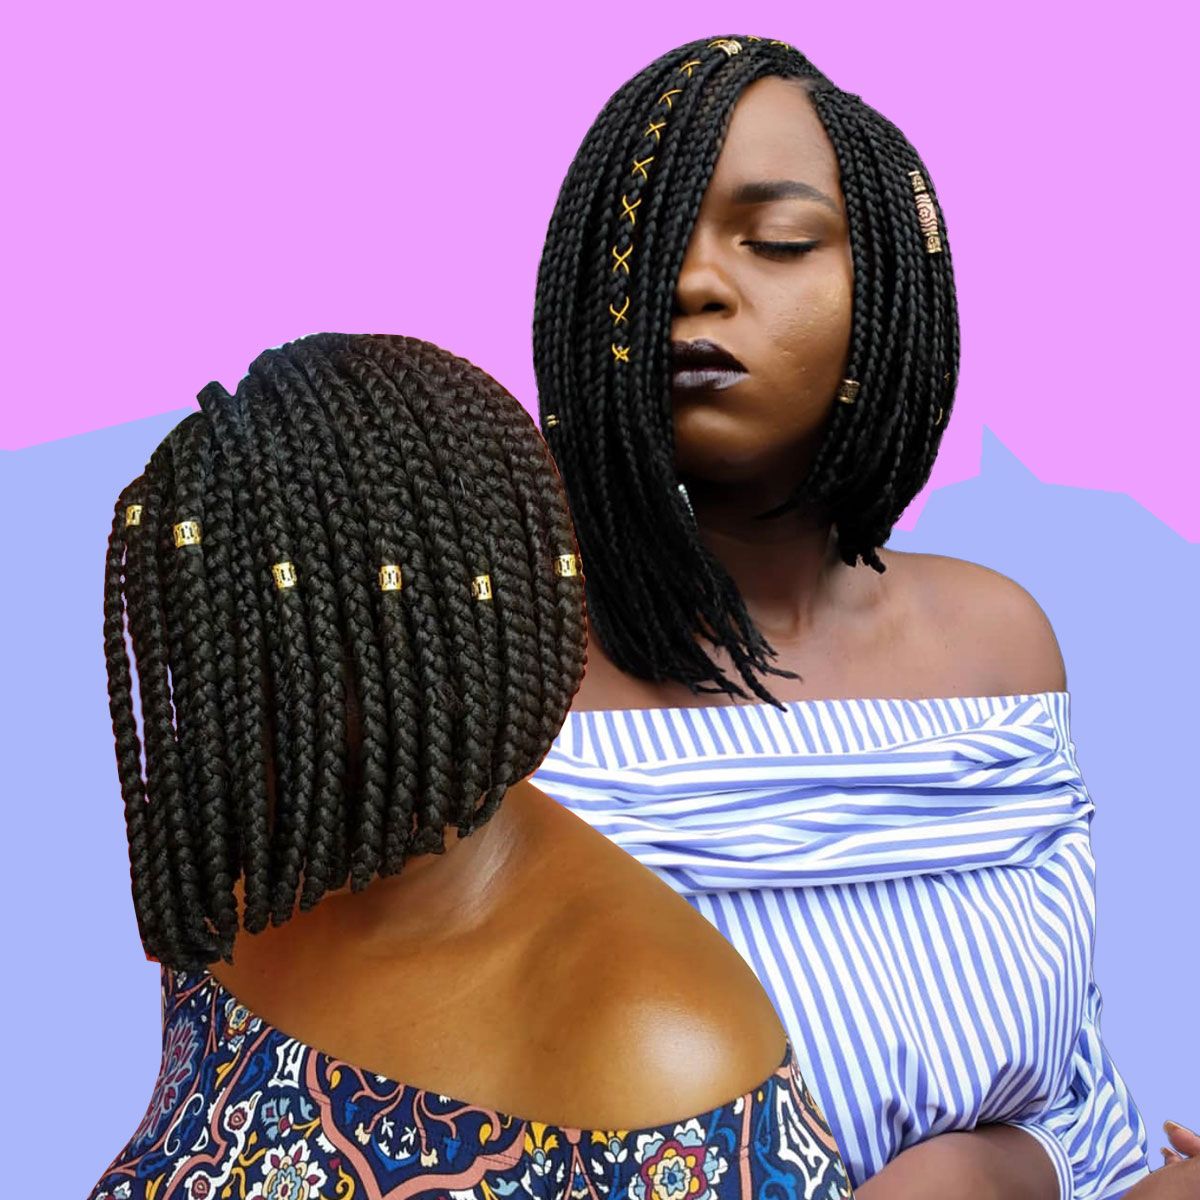 Widely Used Purple Pixies Bob Braid Hairstyles Regarding 17 Beautiful Braided Bobs From Instagram You Need To Give A Try (View 4 of 20)